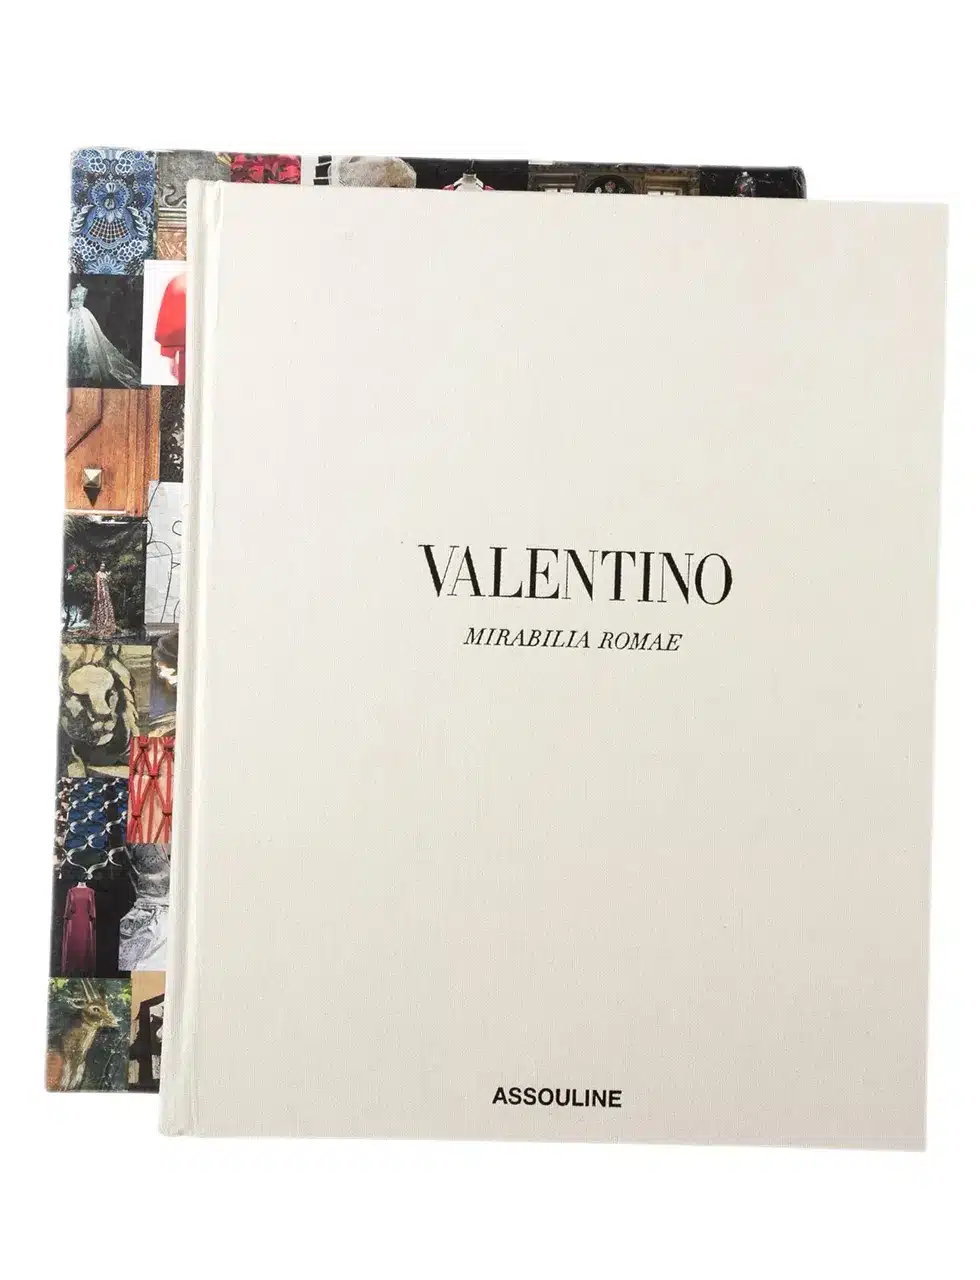 Valentino is one of Katharine Pooley's favourite designers